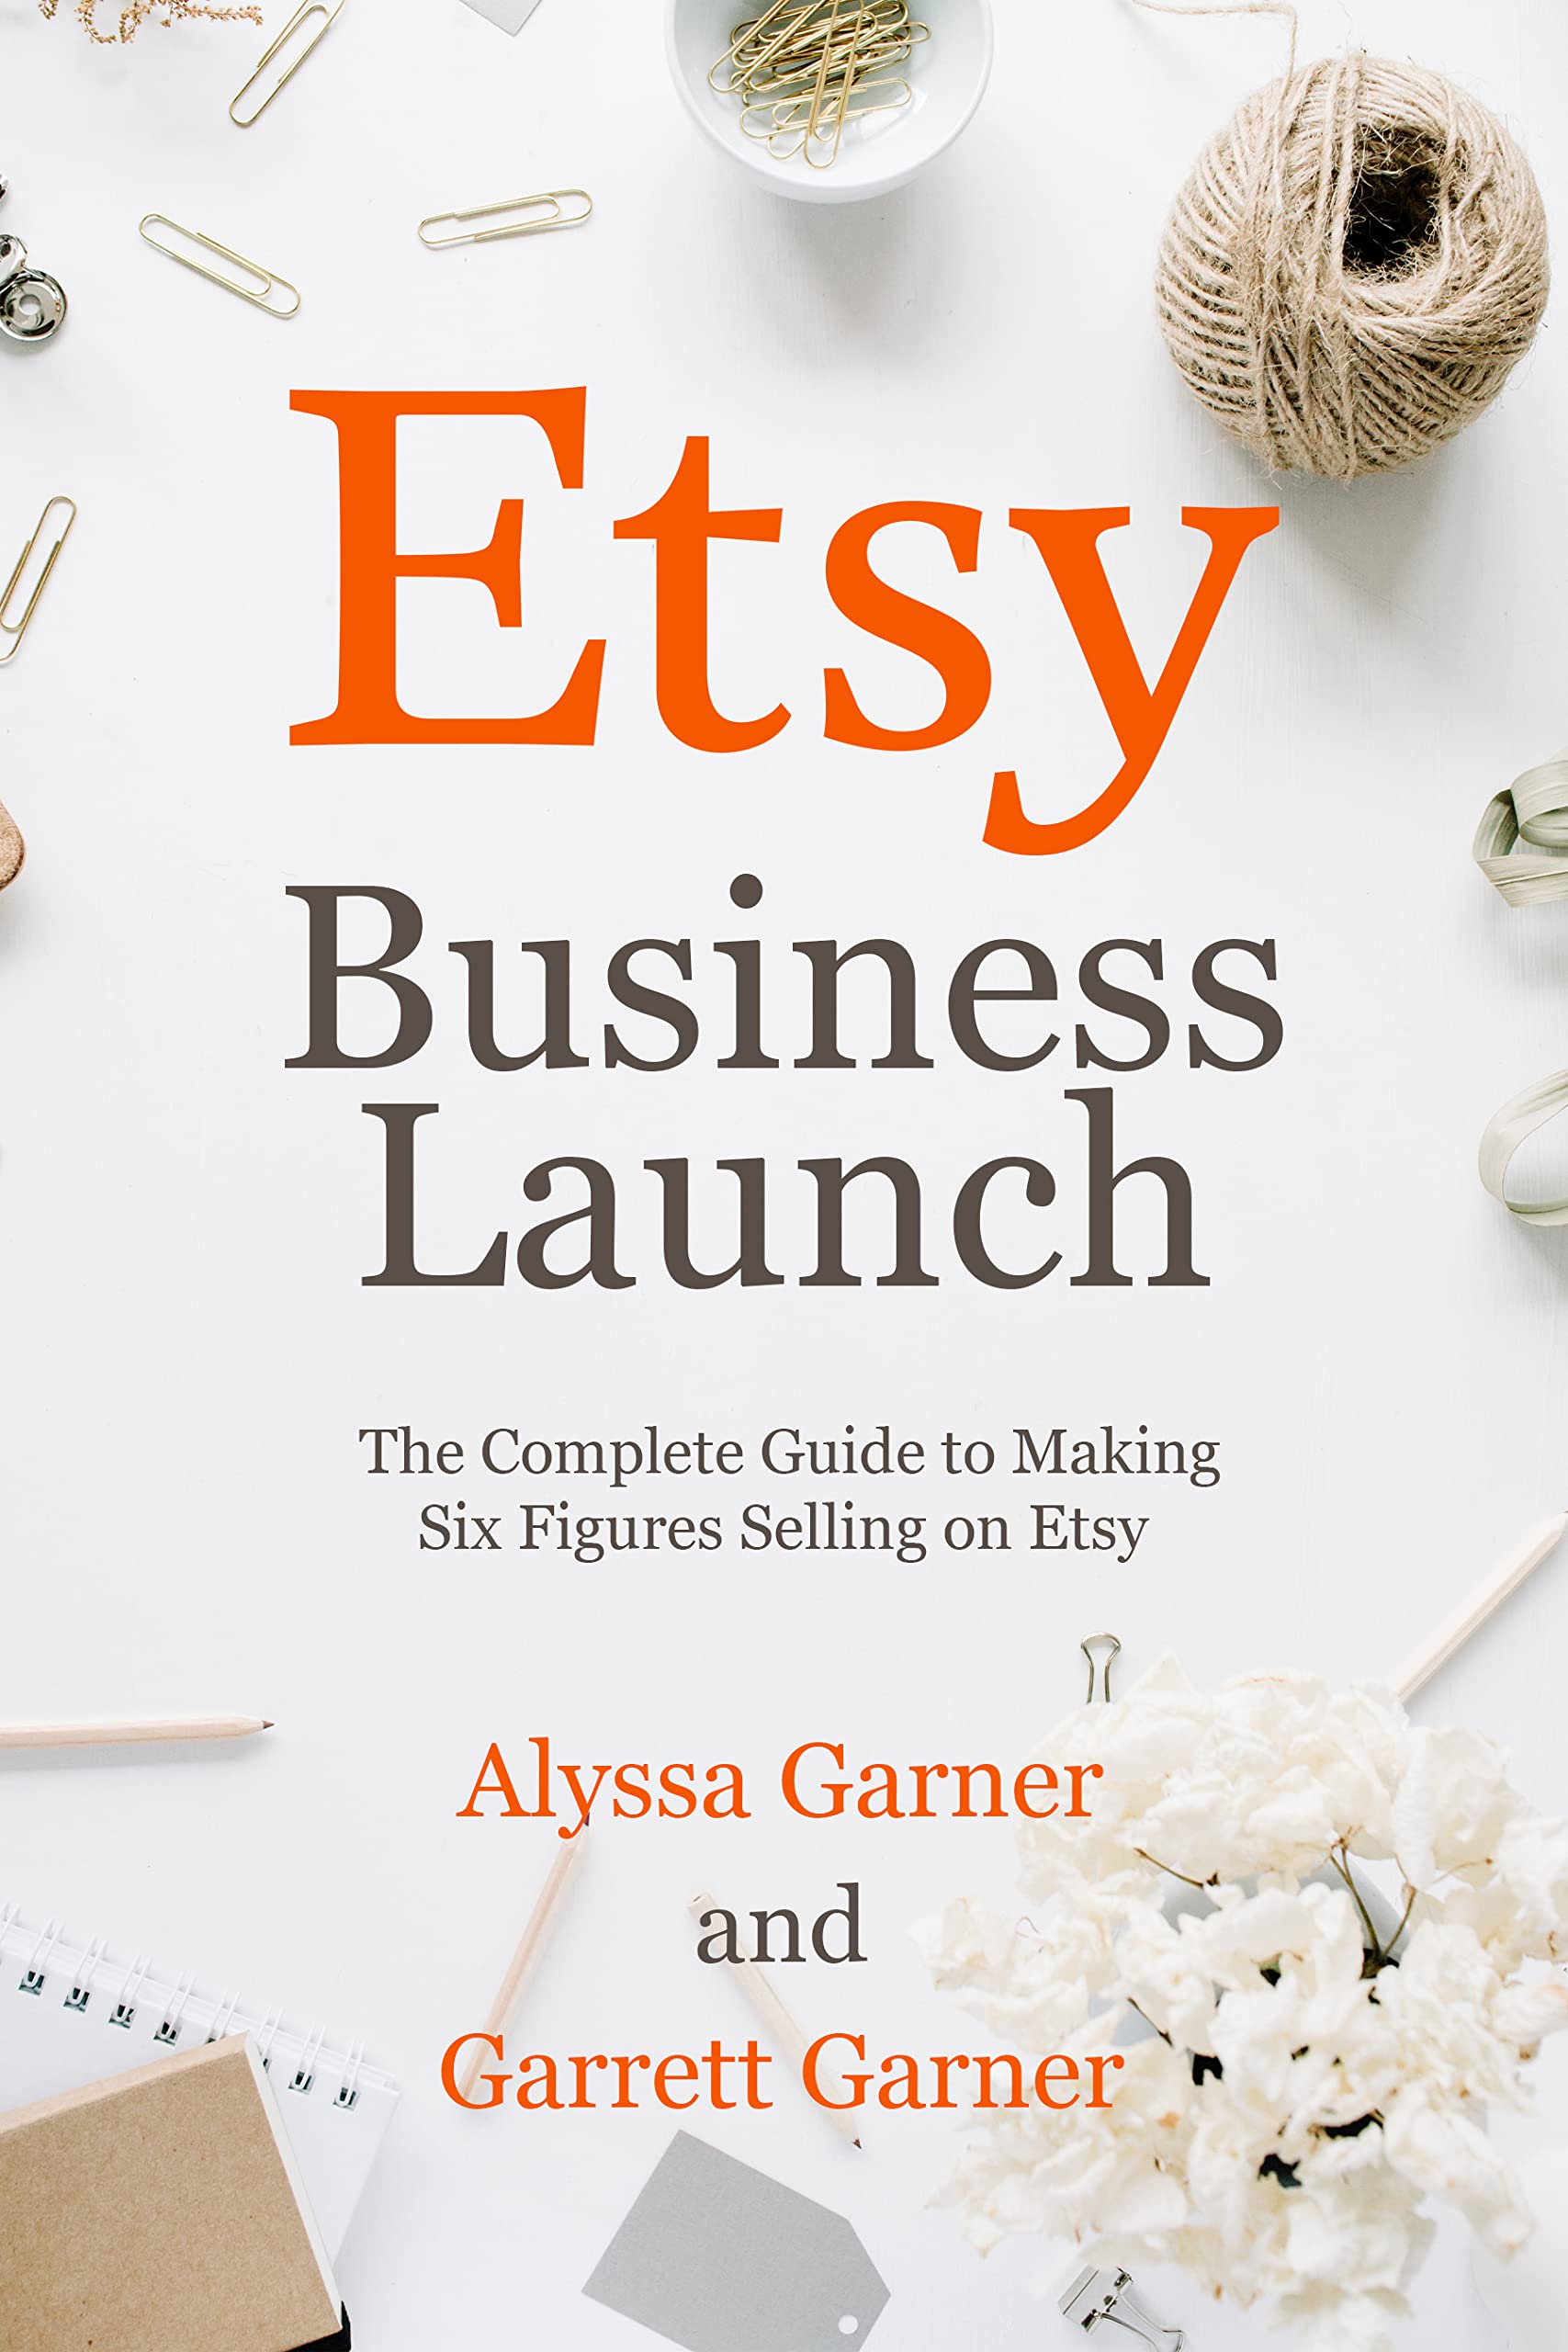 Etsy Business Launch: The Complete Guide to Making Six Figures Selling on Etsy